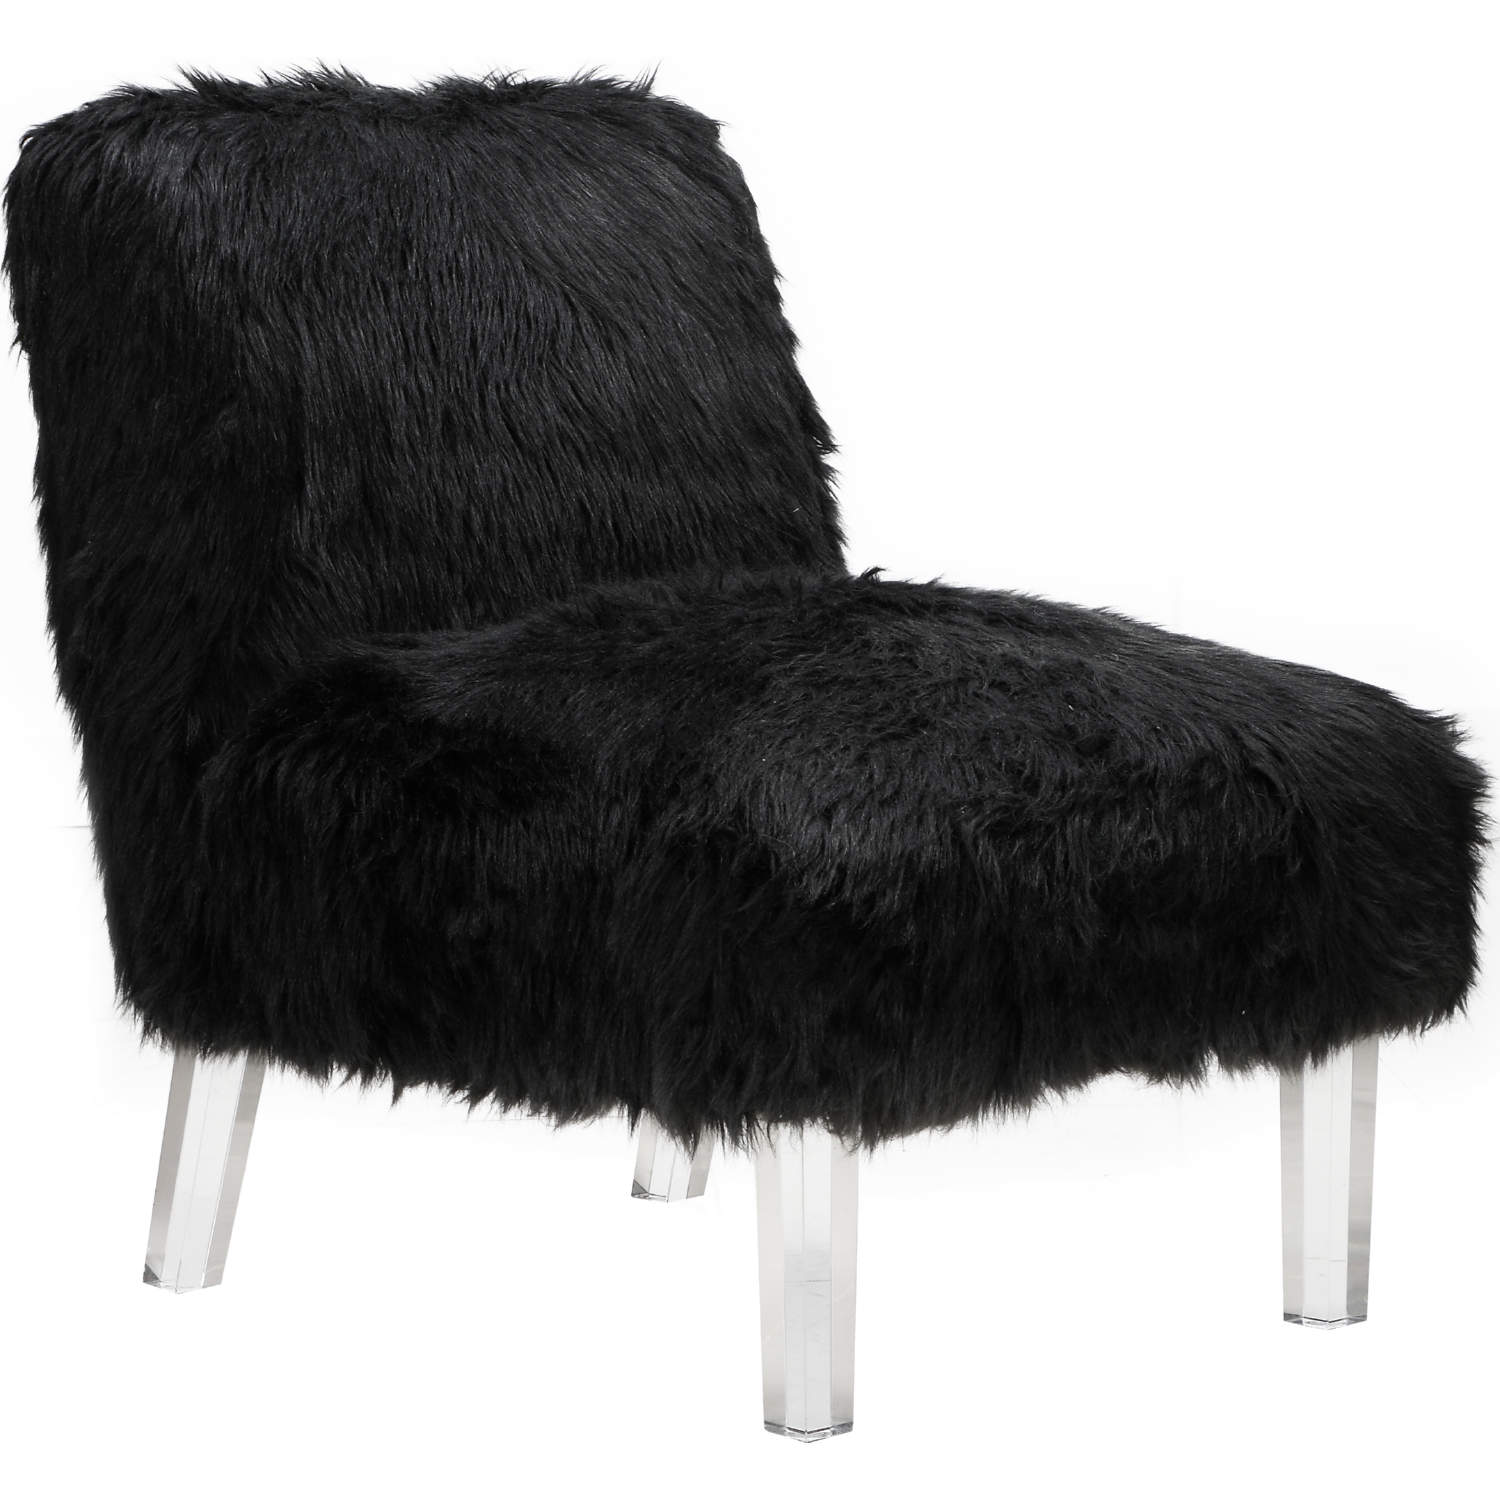 Chic Iconic Fac9498 Dr Fabio Accent Chair In Black Faux Fur Acrylic Legs